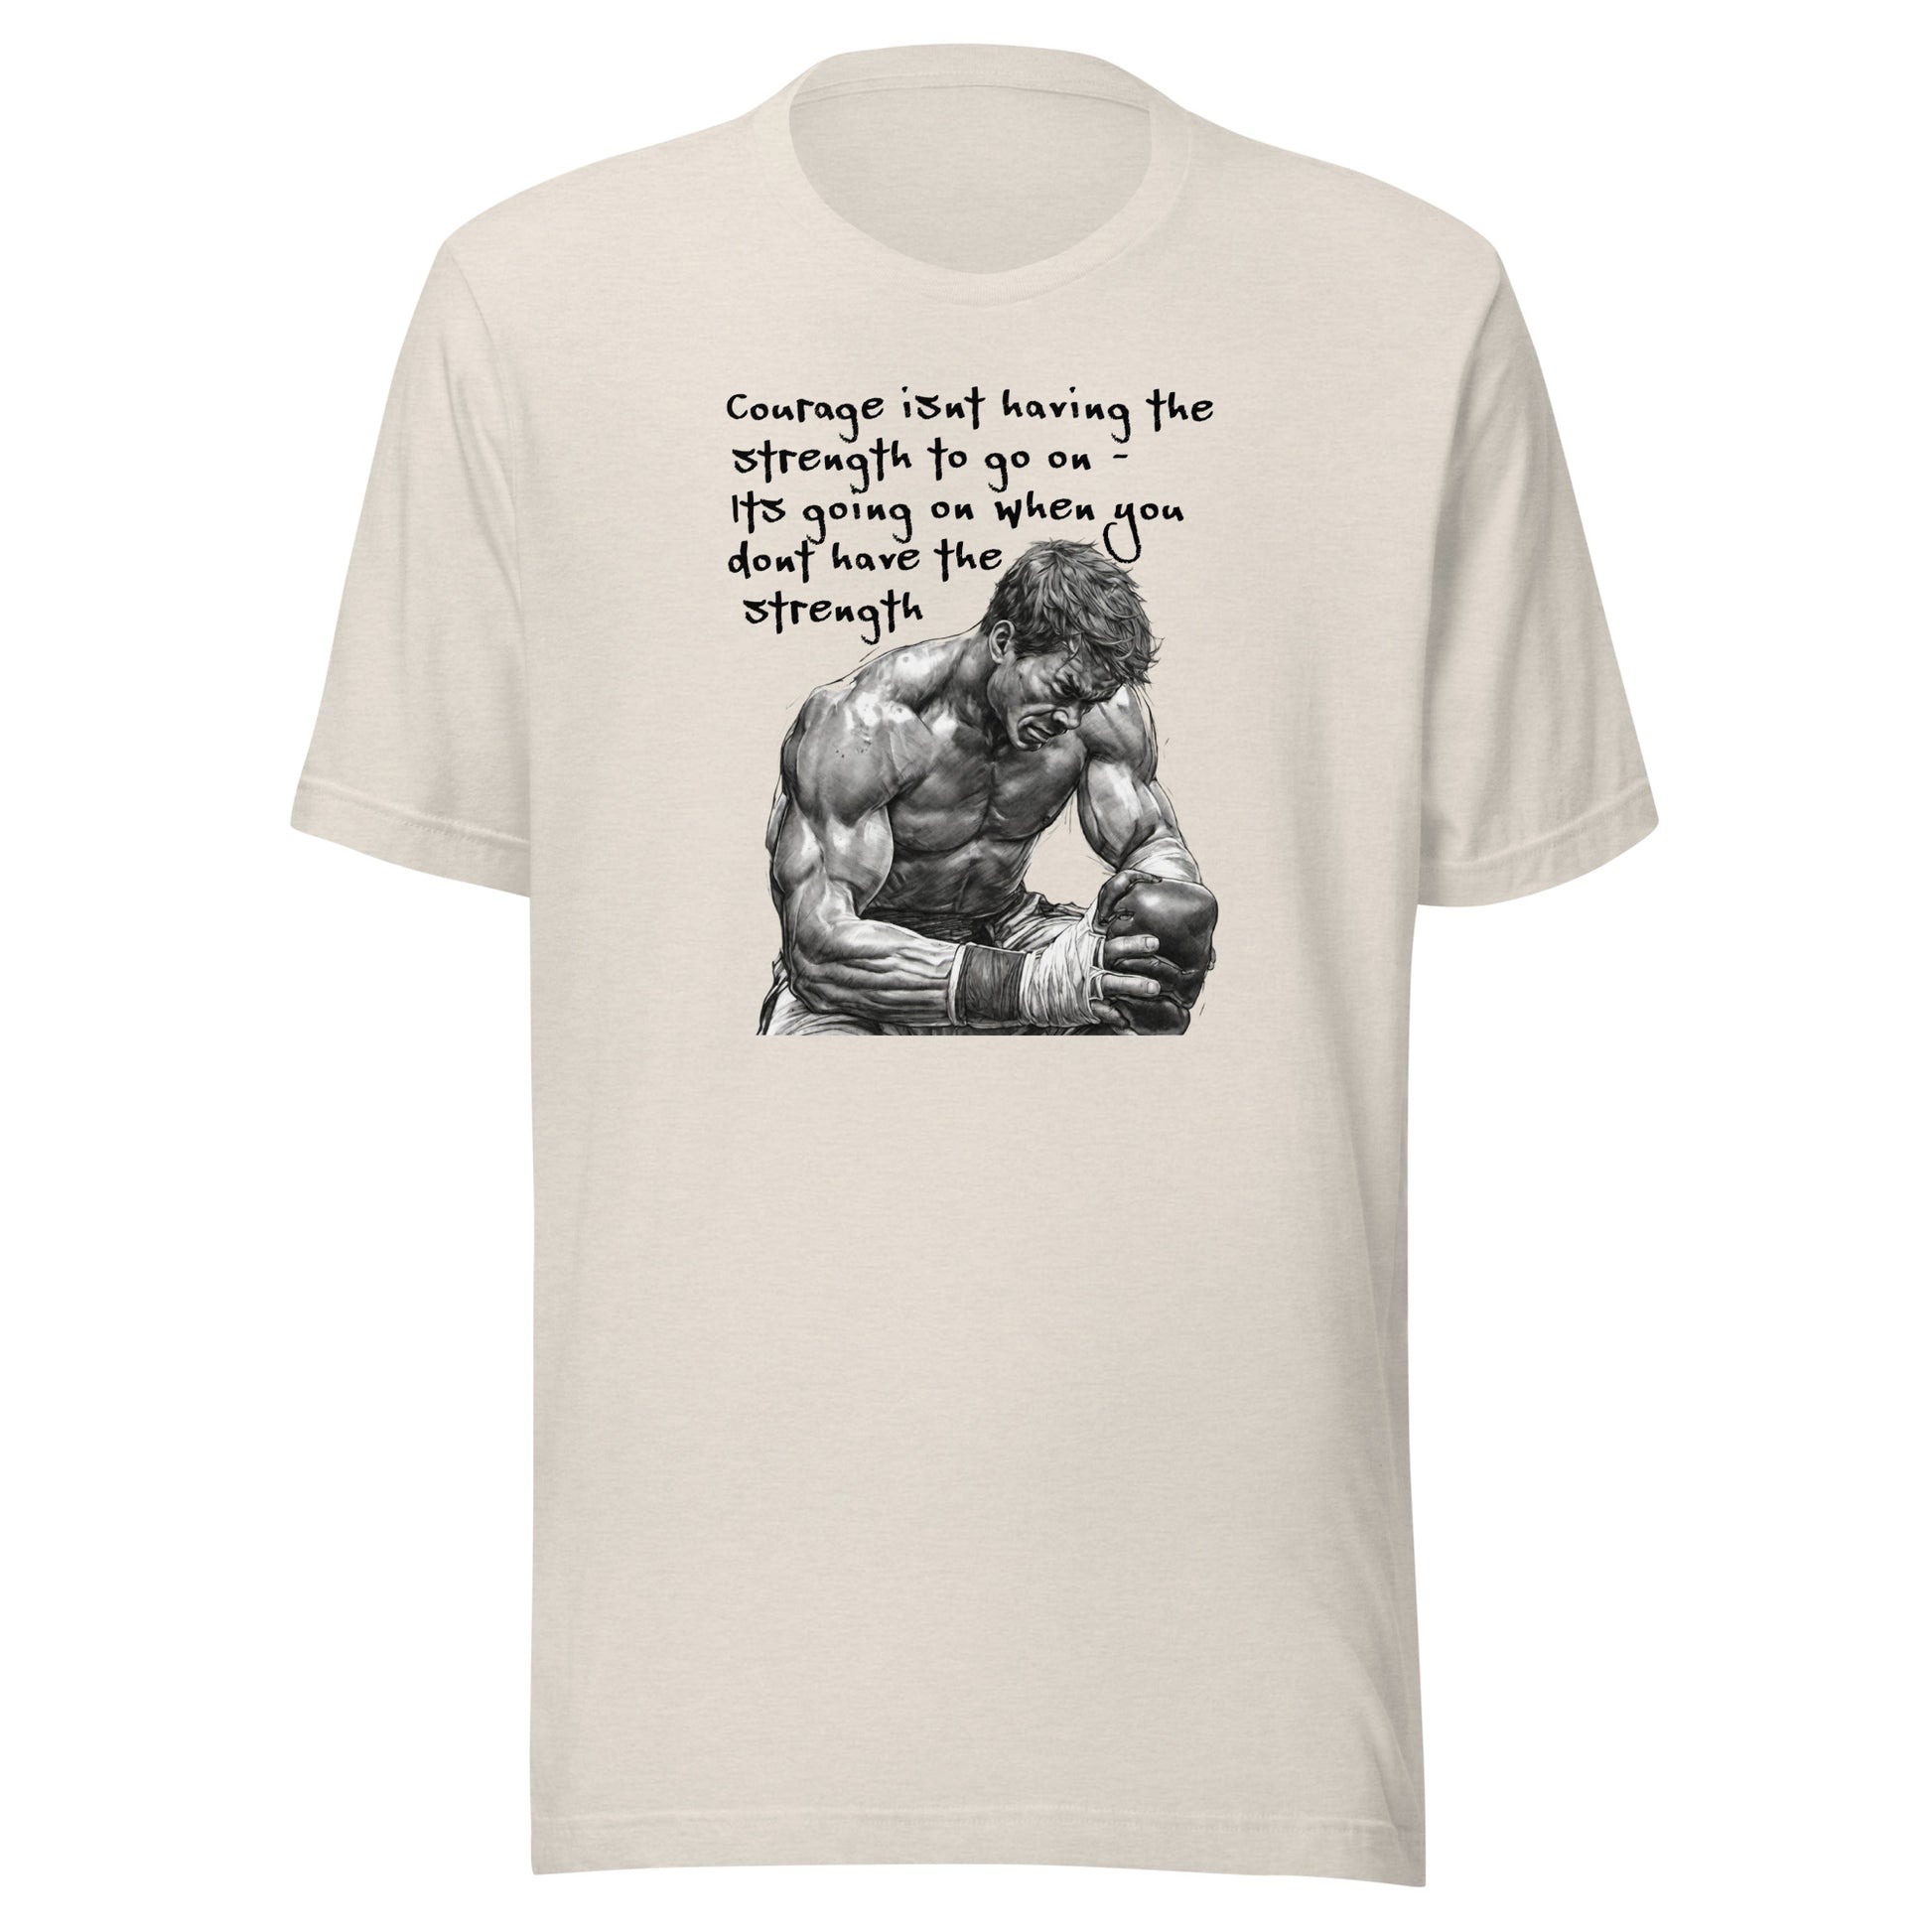 Courage and Strength Men's Graphic T-Shirt Heather Dust